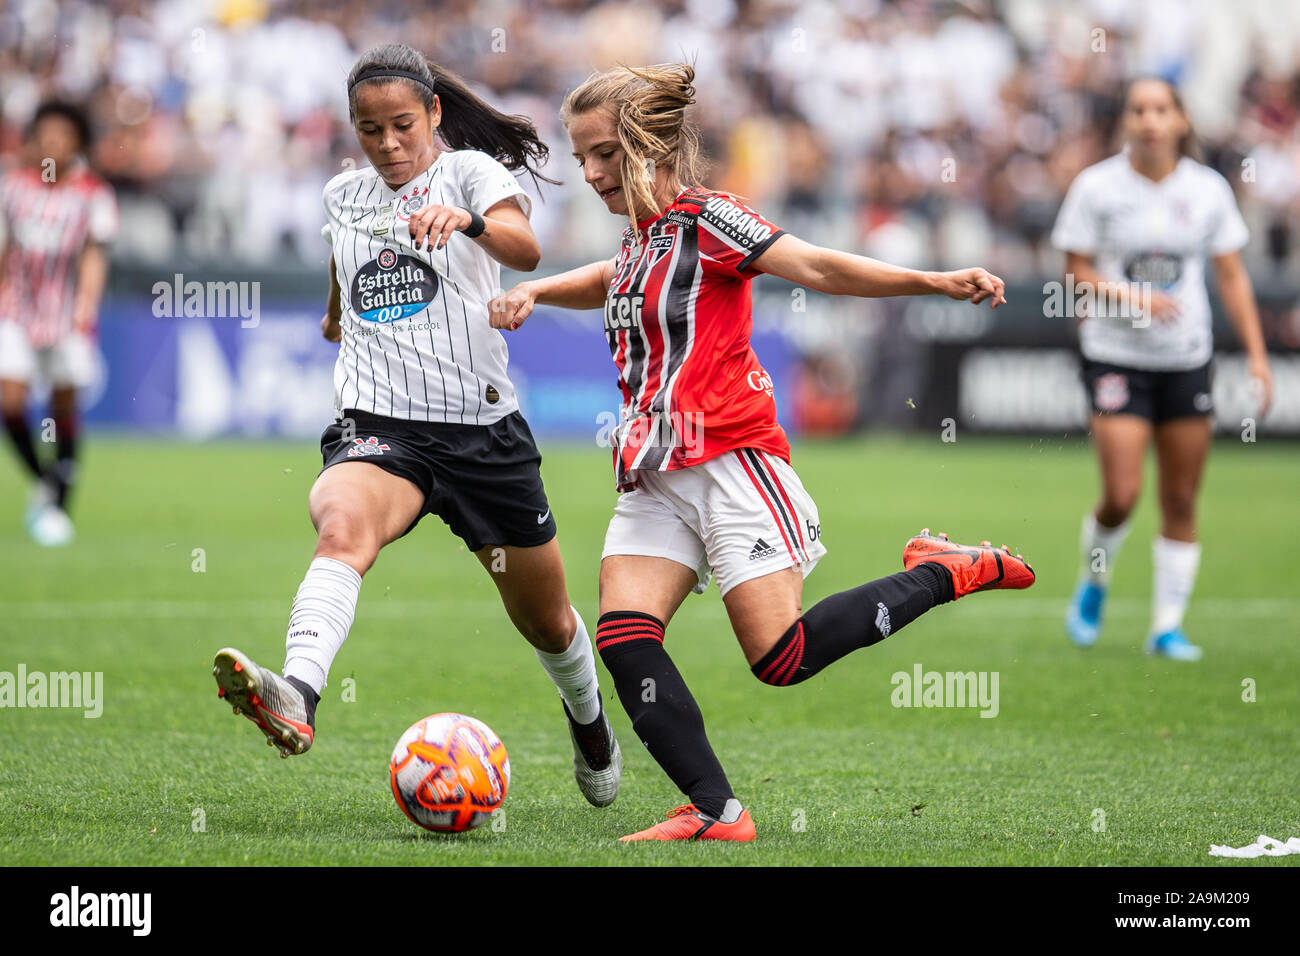 SÃO PAULO, SP - 16.11.2019: CORINTHIANS X SÃO PAULO - Victória Albuquerque and Natane dispute play. Corinthians and Sao Paulo make the second game of the majestic final for the 2019 Paulista Women's Fall Cll Championship. The first match was won by Corinthians 1-0. The match takes place this Saty morning, Ng, November 16, 2019, at the Corinthians Arena, in São Paulo. (Photo: Van Campos/Fotoarena) Stock Photo